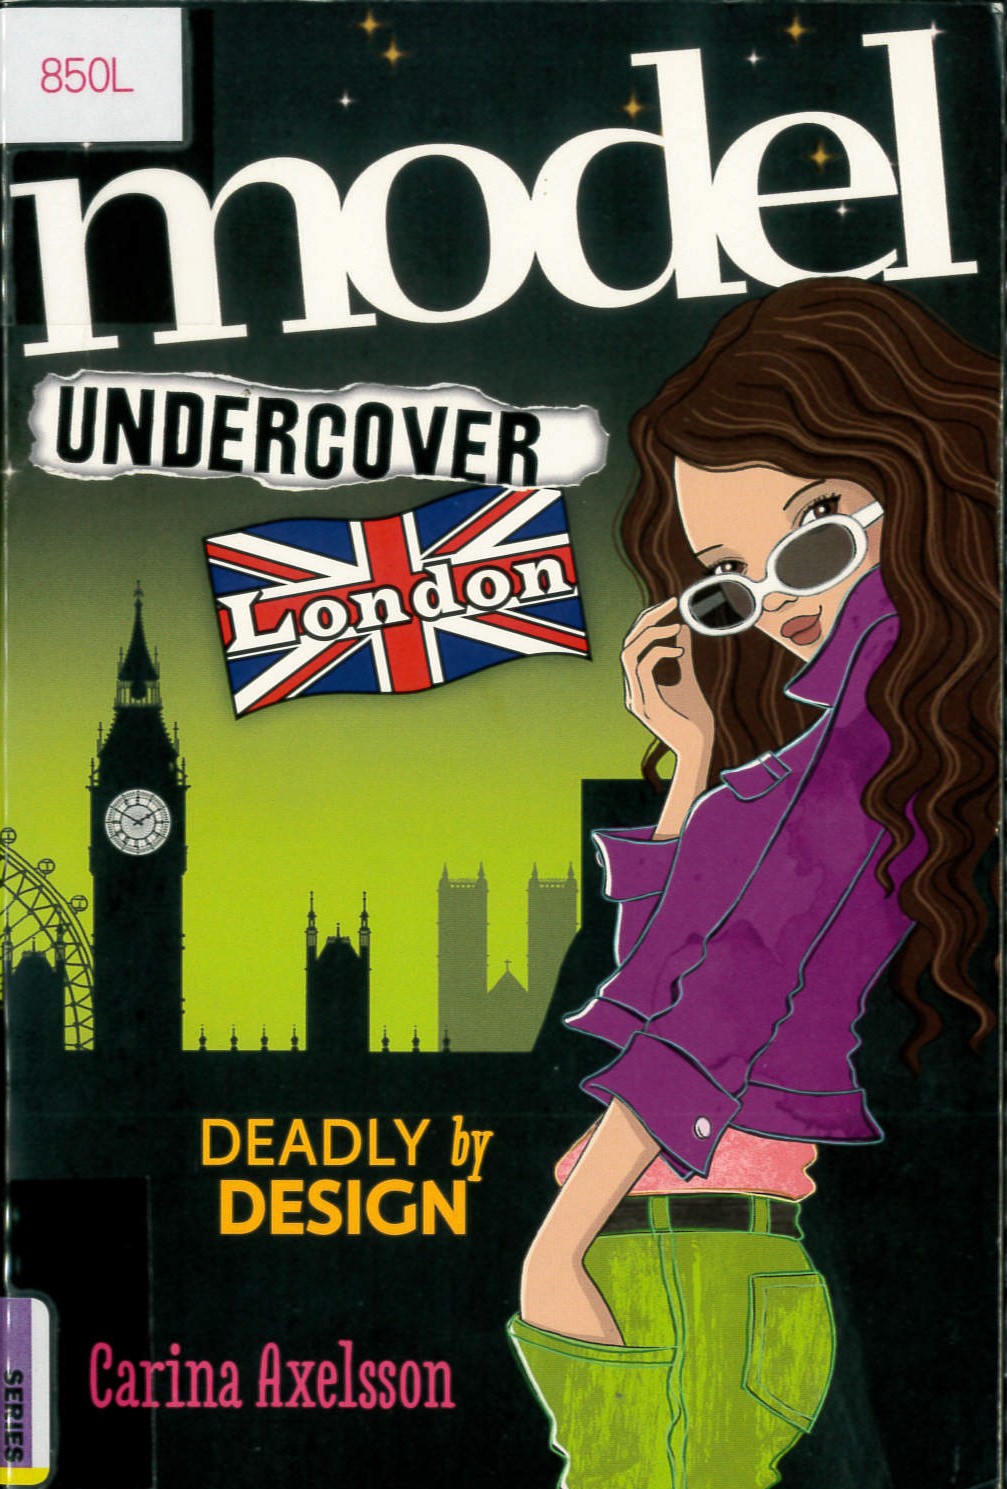 Model undercover : London : [deadly by design] /